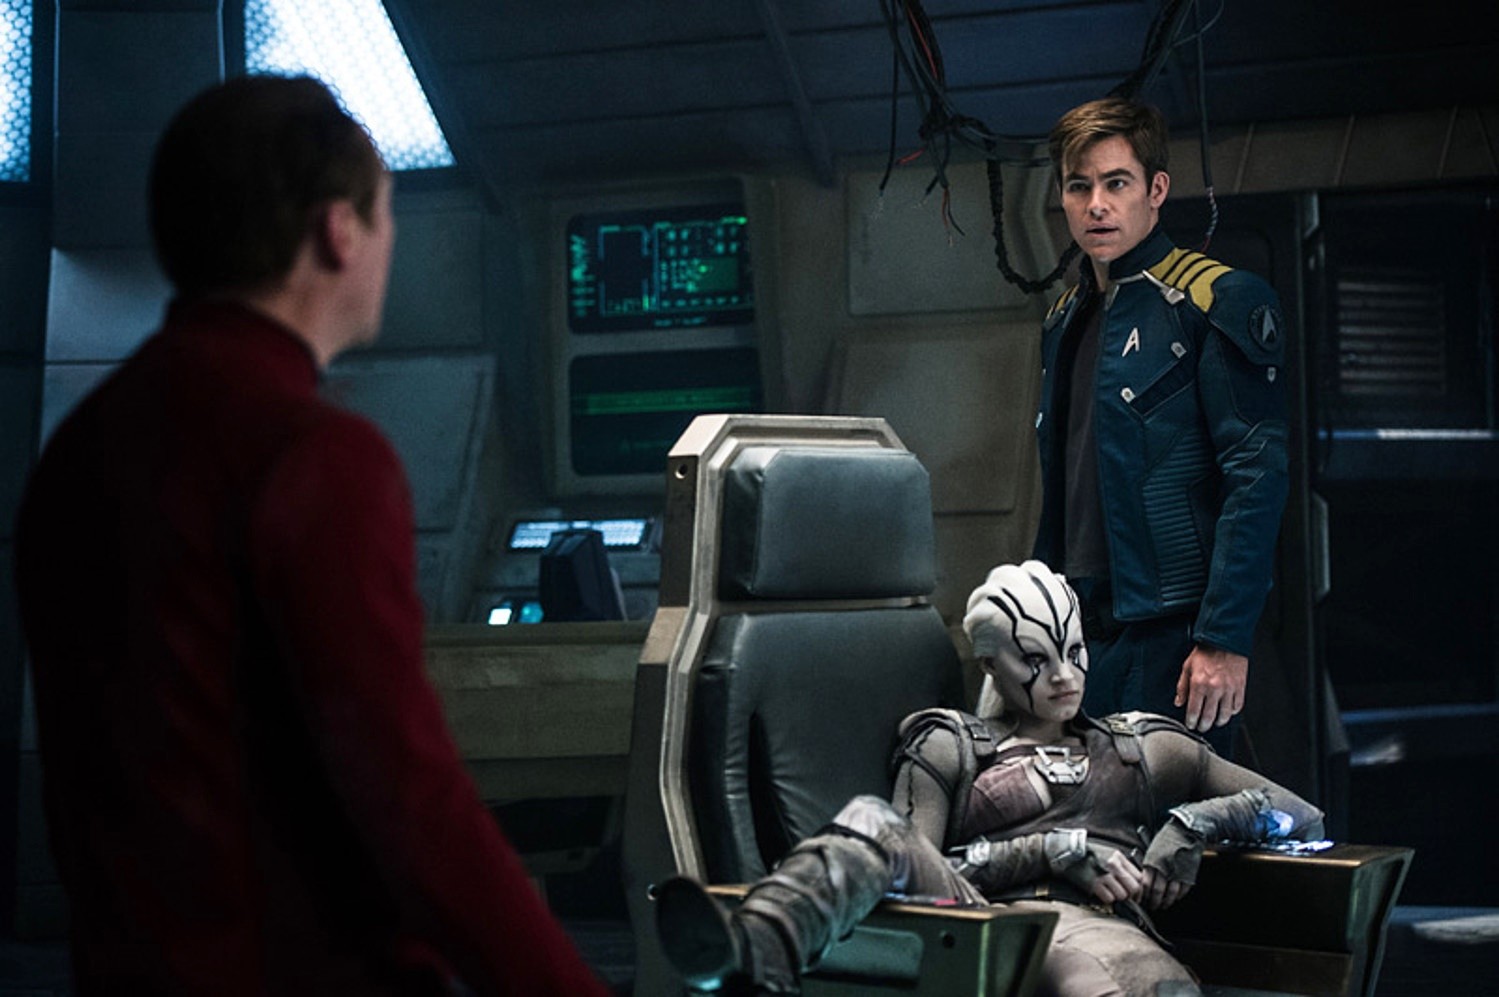 Sofia Boutella stars as Jaylah and Chris Pine stars as Kirk in Paramount Pictures' Star Trek Beyond (2016)